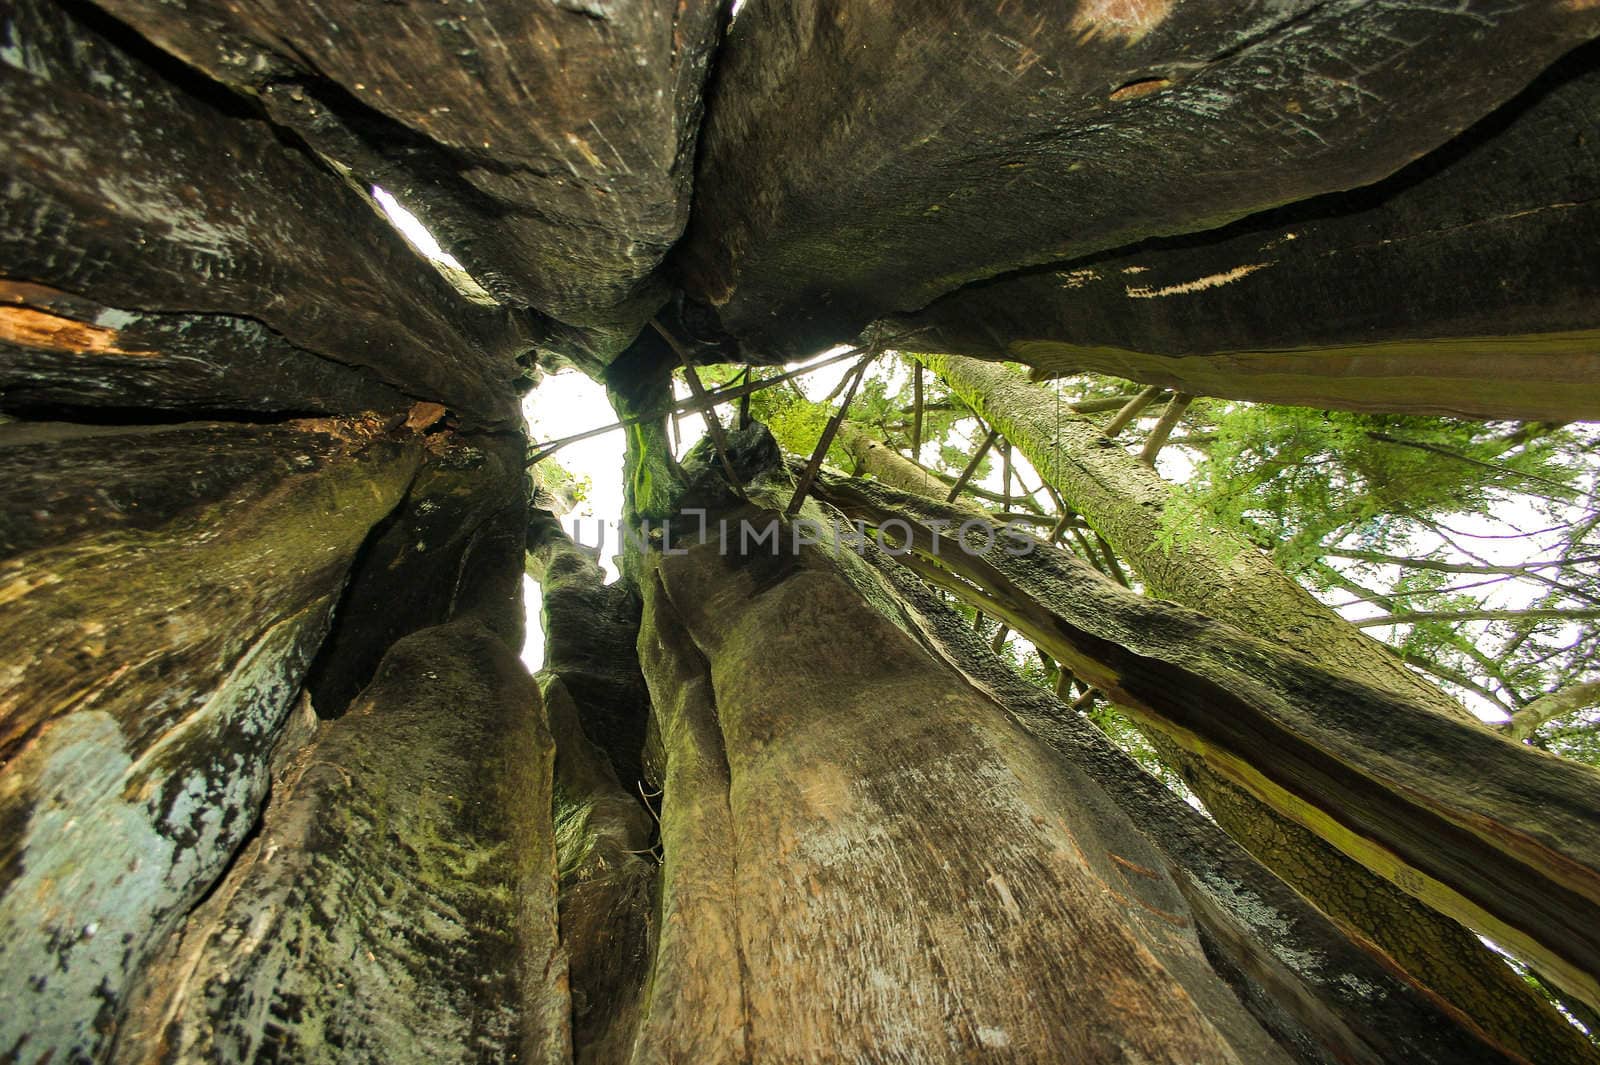 This is a picture taken inside a giant hollow tree in Stanley Park; Vancouver.